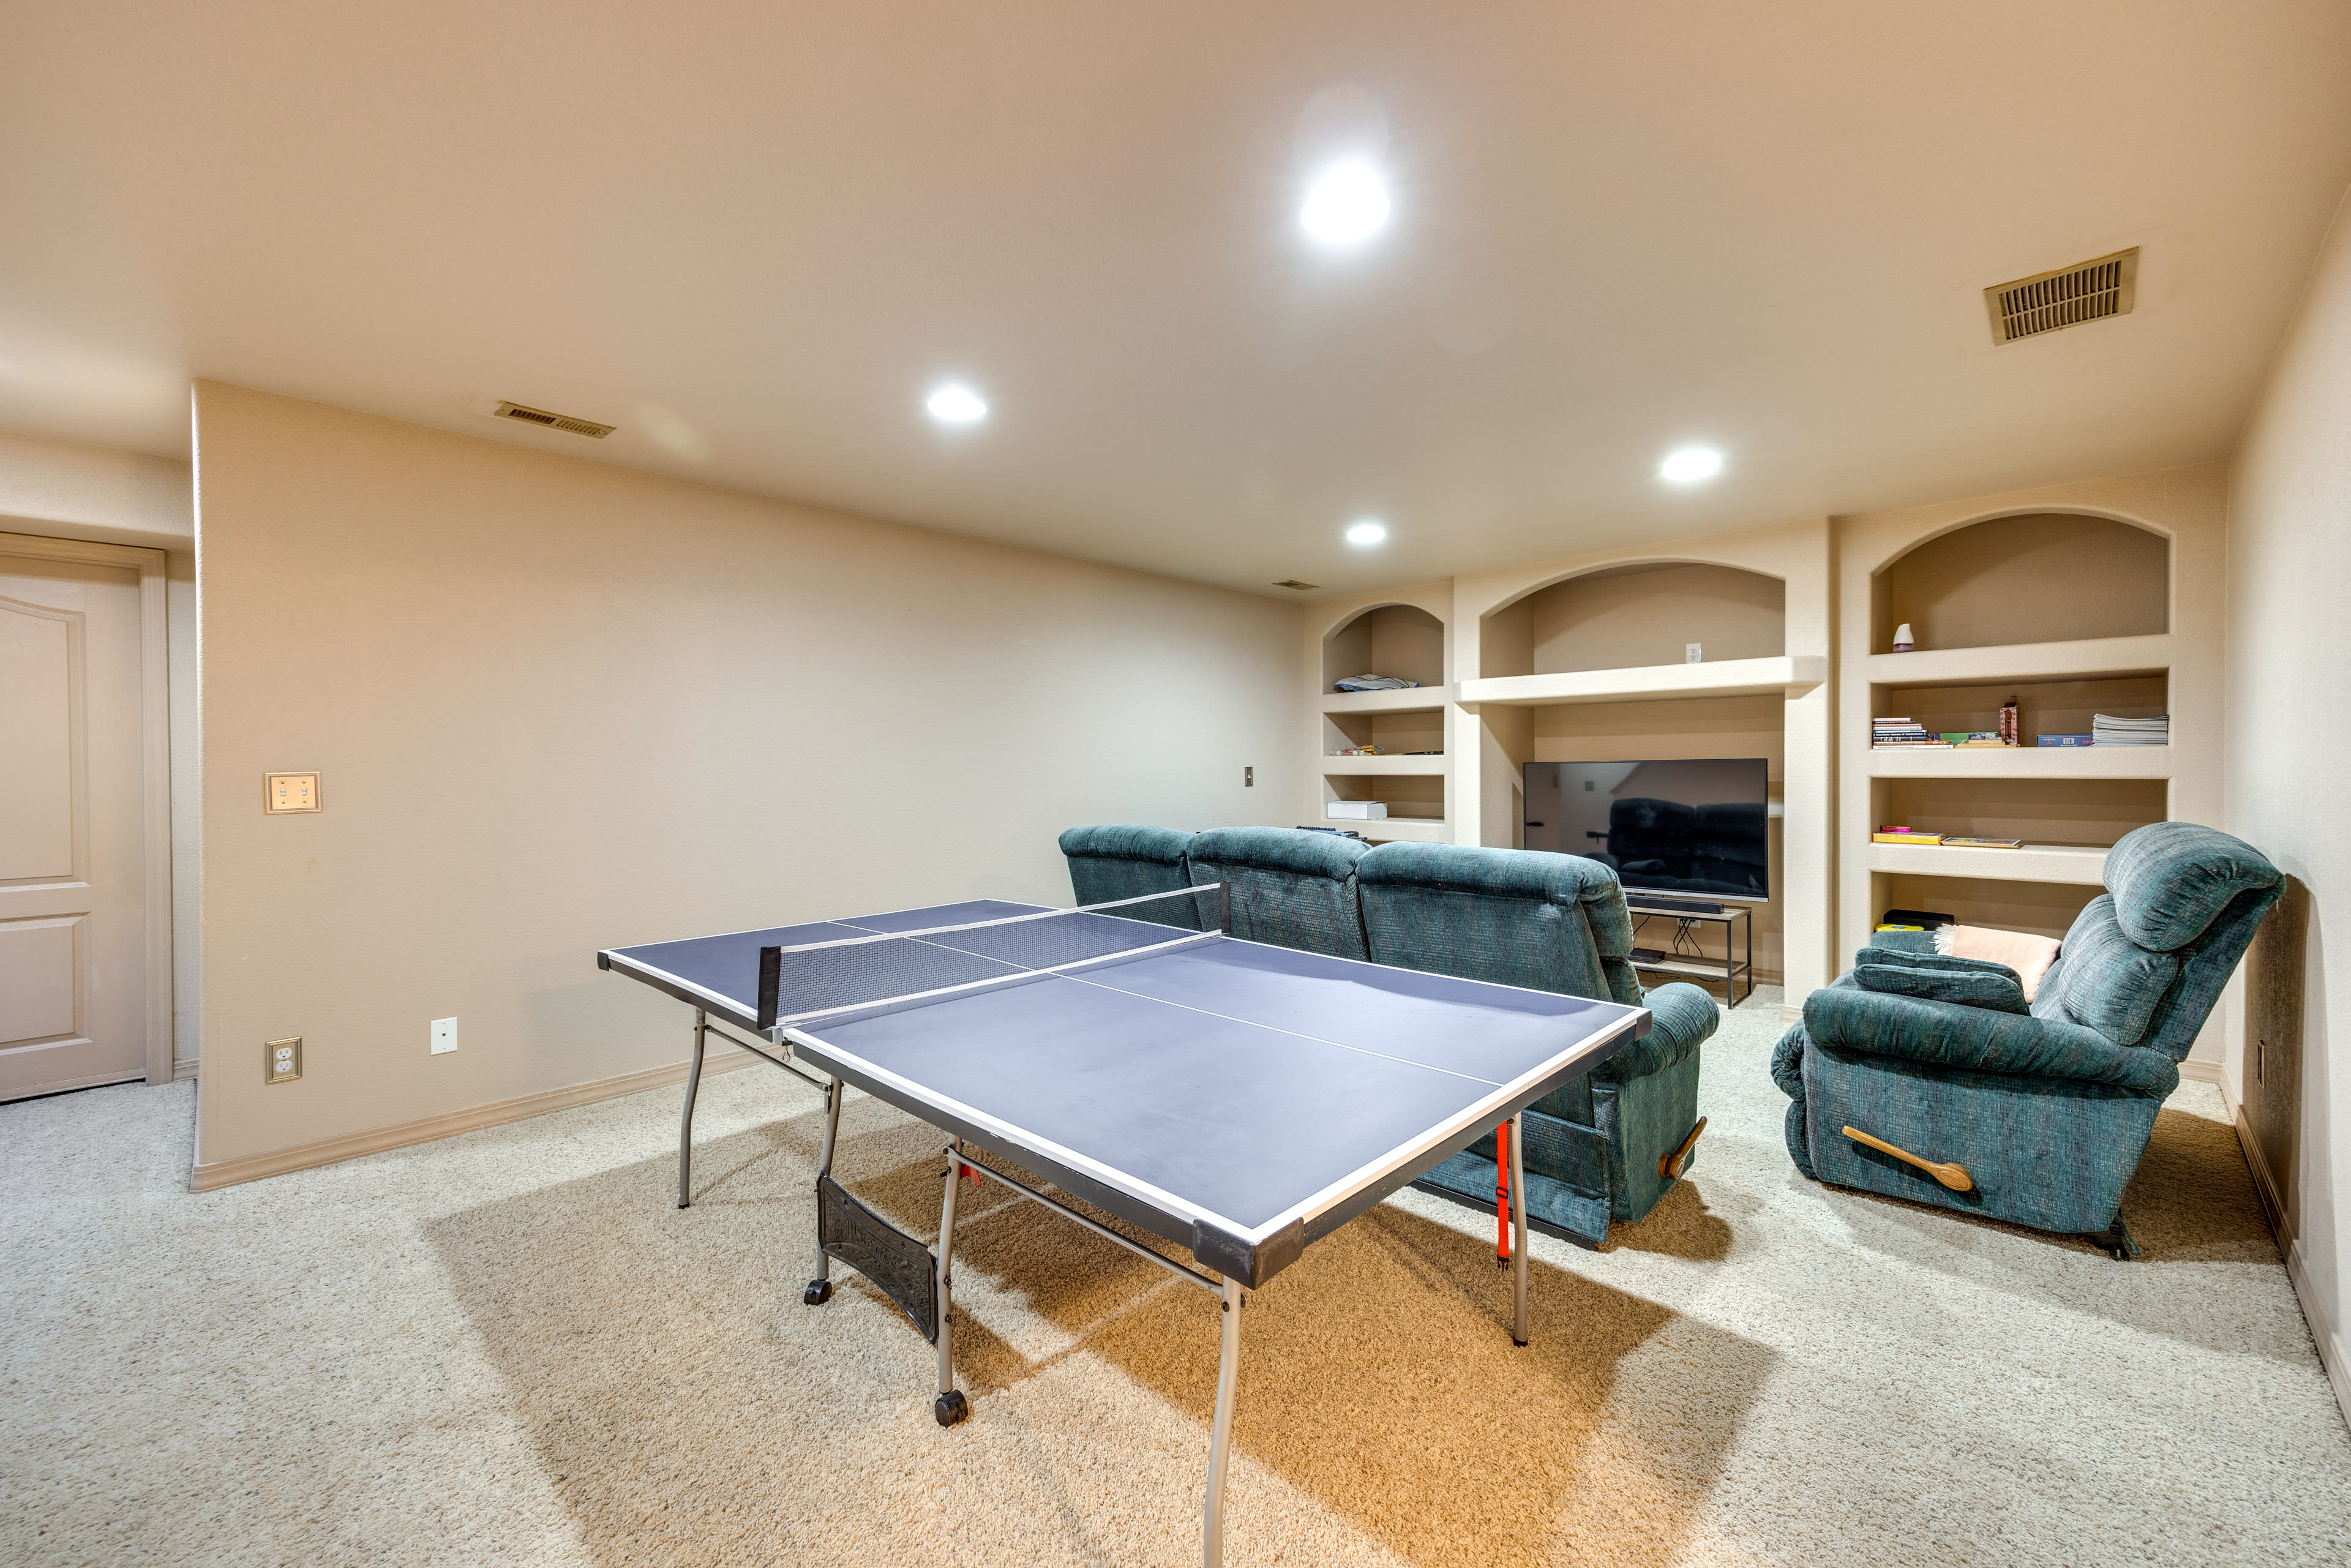 Game Room | Foosball Table | Ping Pong Table | DVD Player